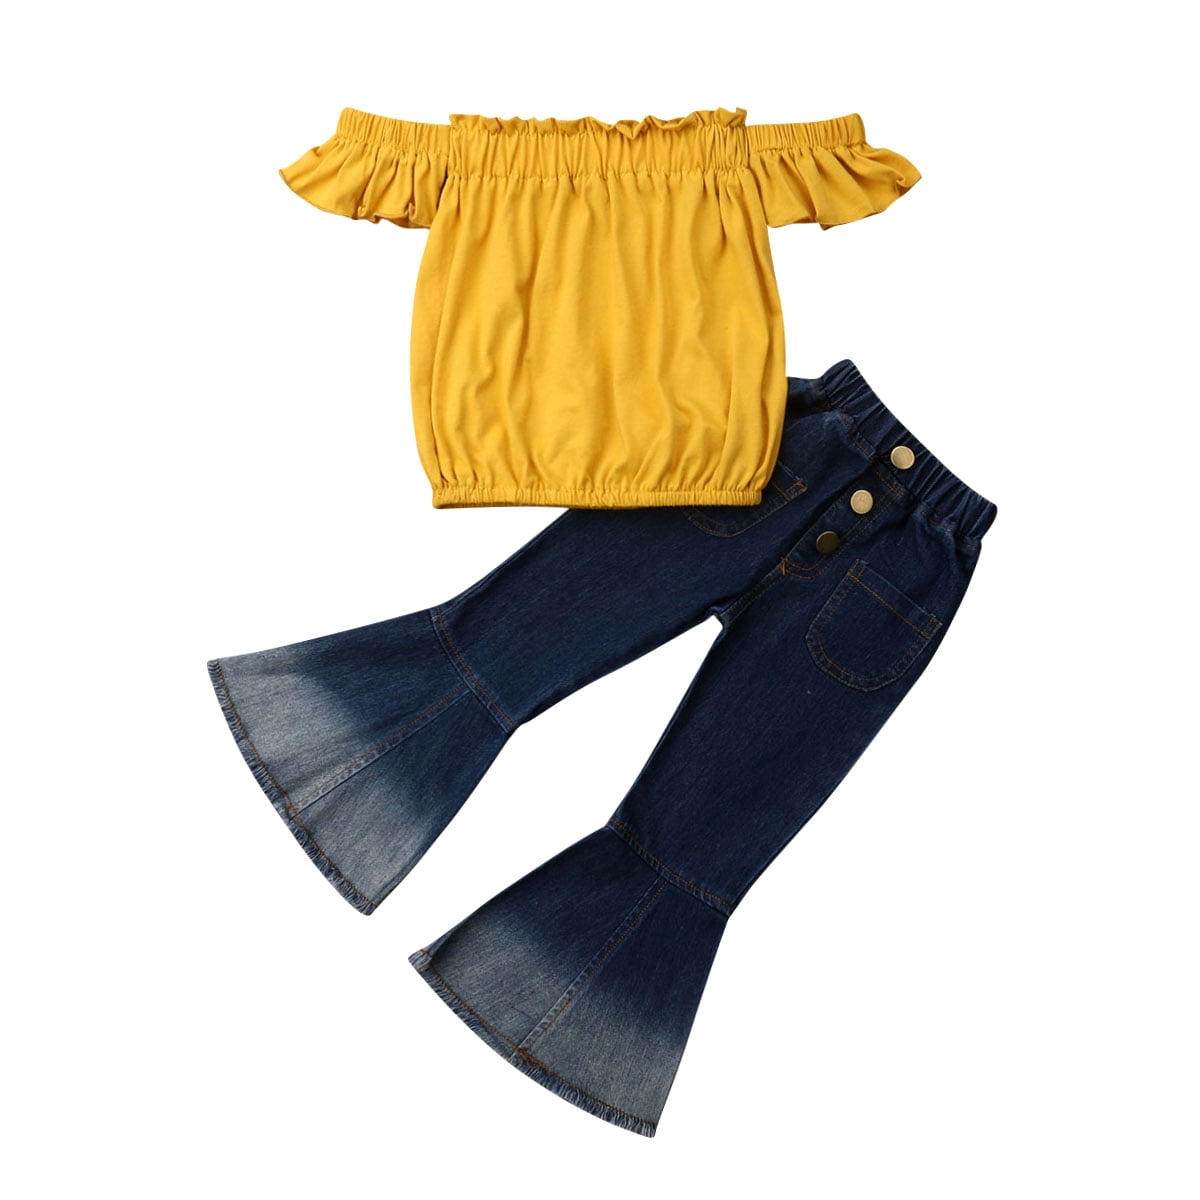 Toddler Baby Girl Clothes Off Shoulder Tube Top Shirt Bell Bottom Jeans  Pants Summer Outfits 3T Yellow